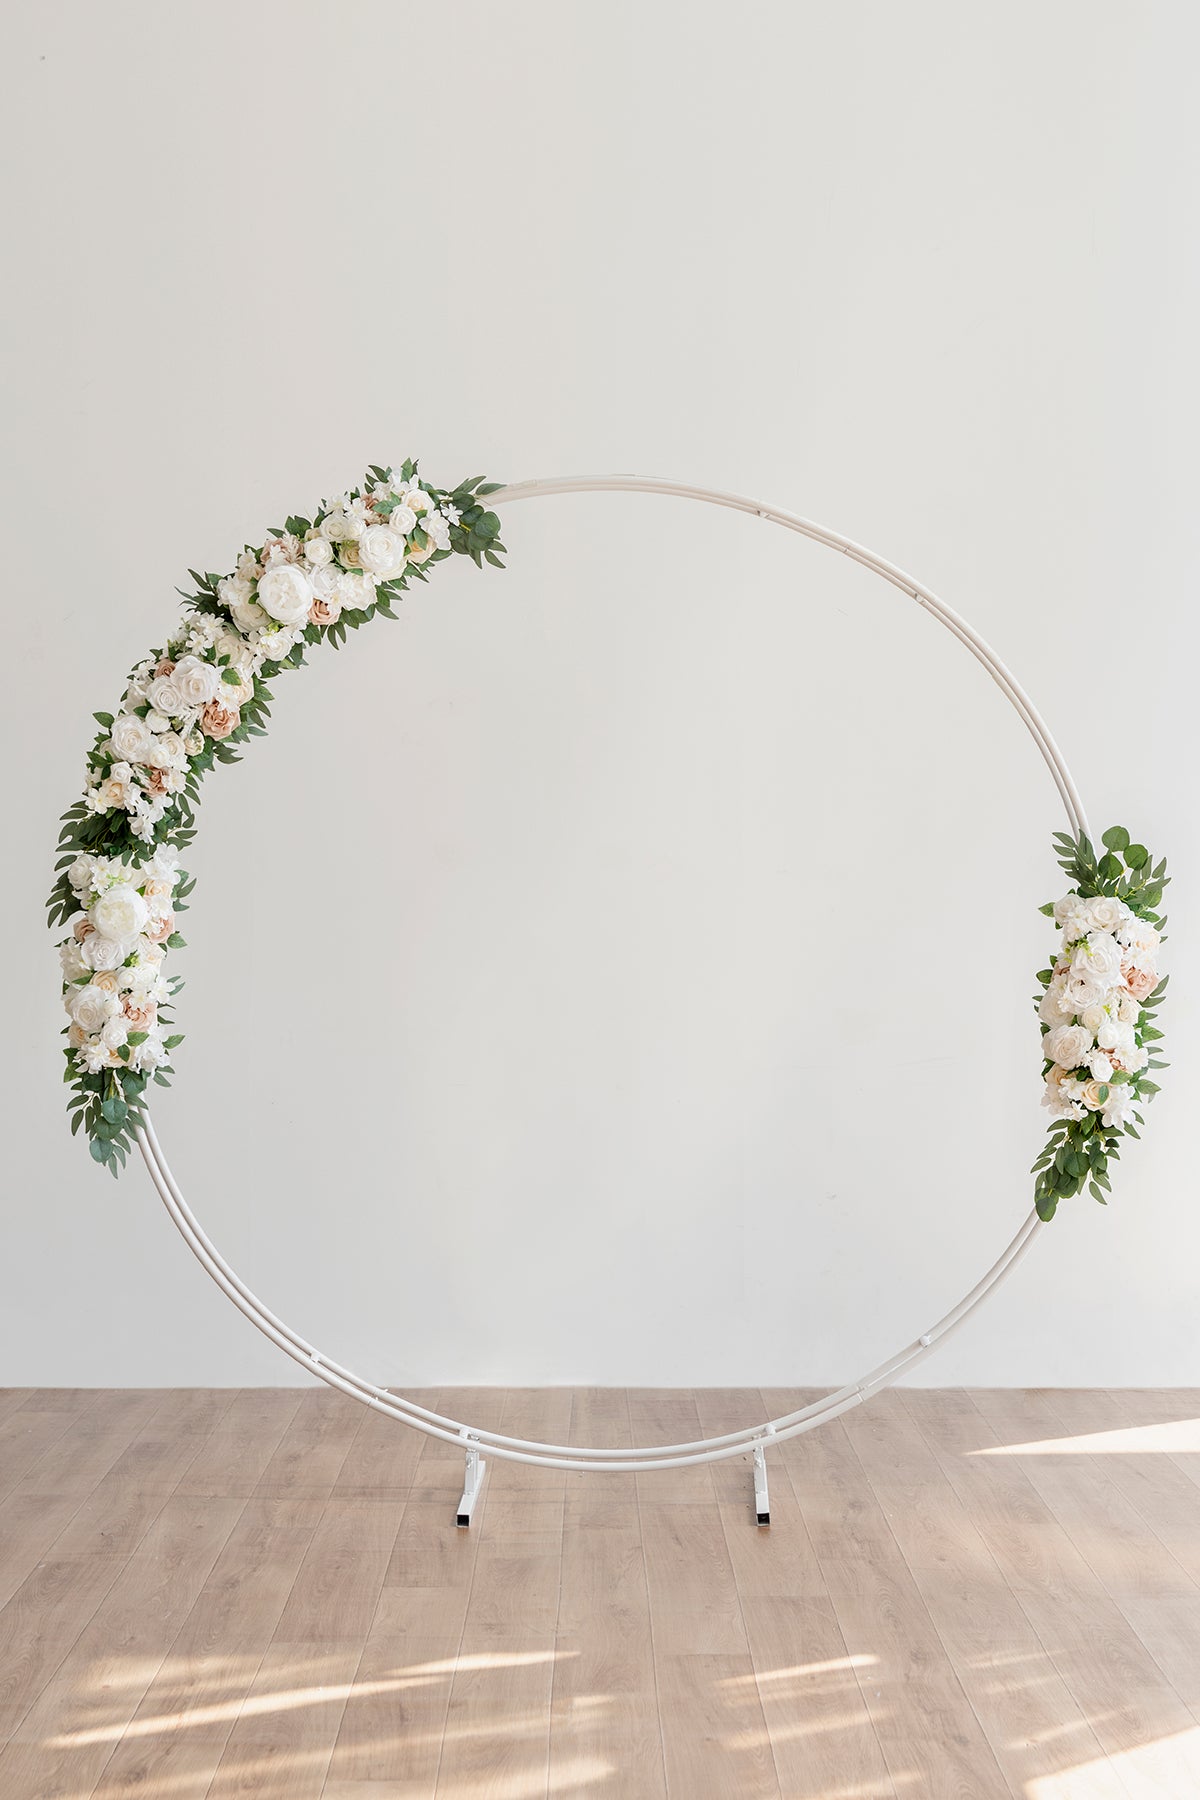 Flower Arrangements for Arch Decor in White & Sage | Clearance